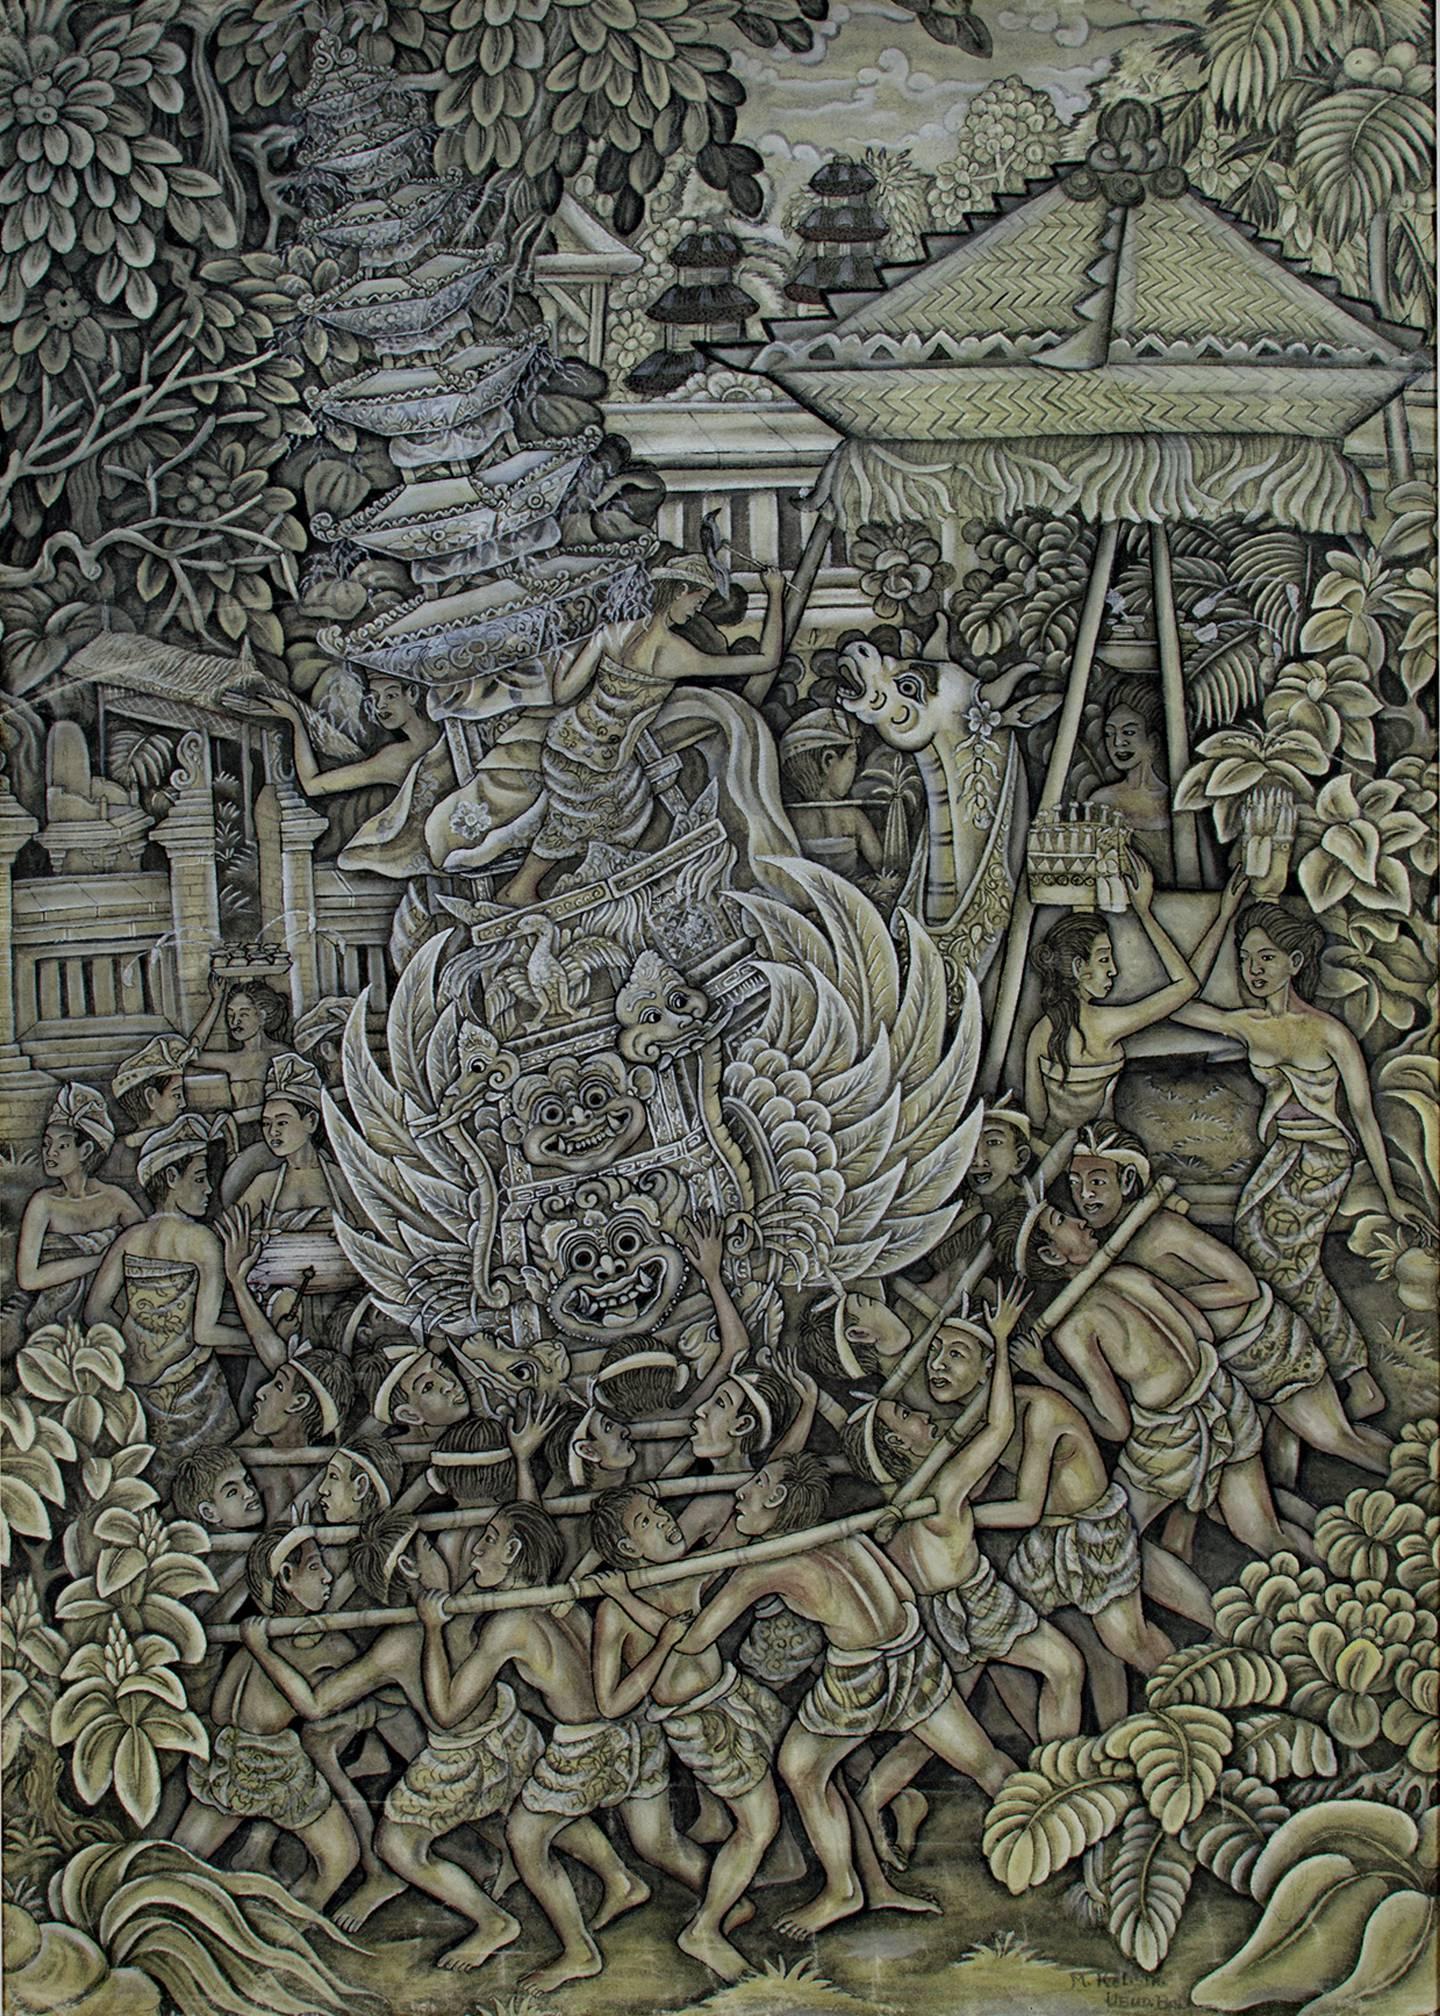 Unknown Figurative Painting - "Royal Cremation Ceremony Ubud Bali" Oil Painting on Canvas created in Indonesia